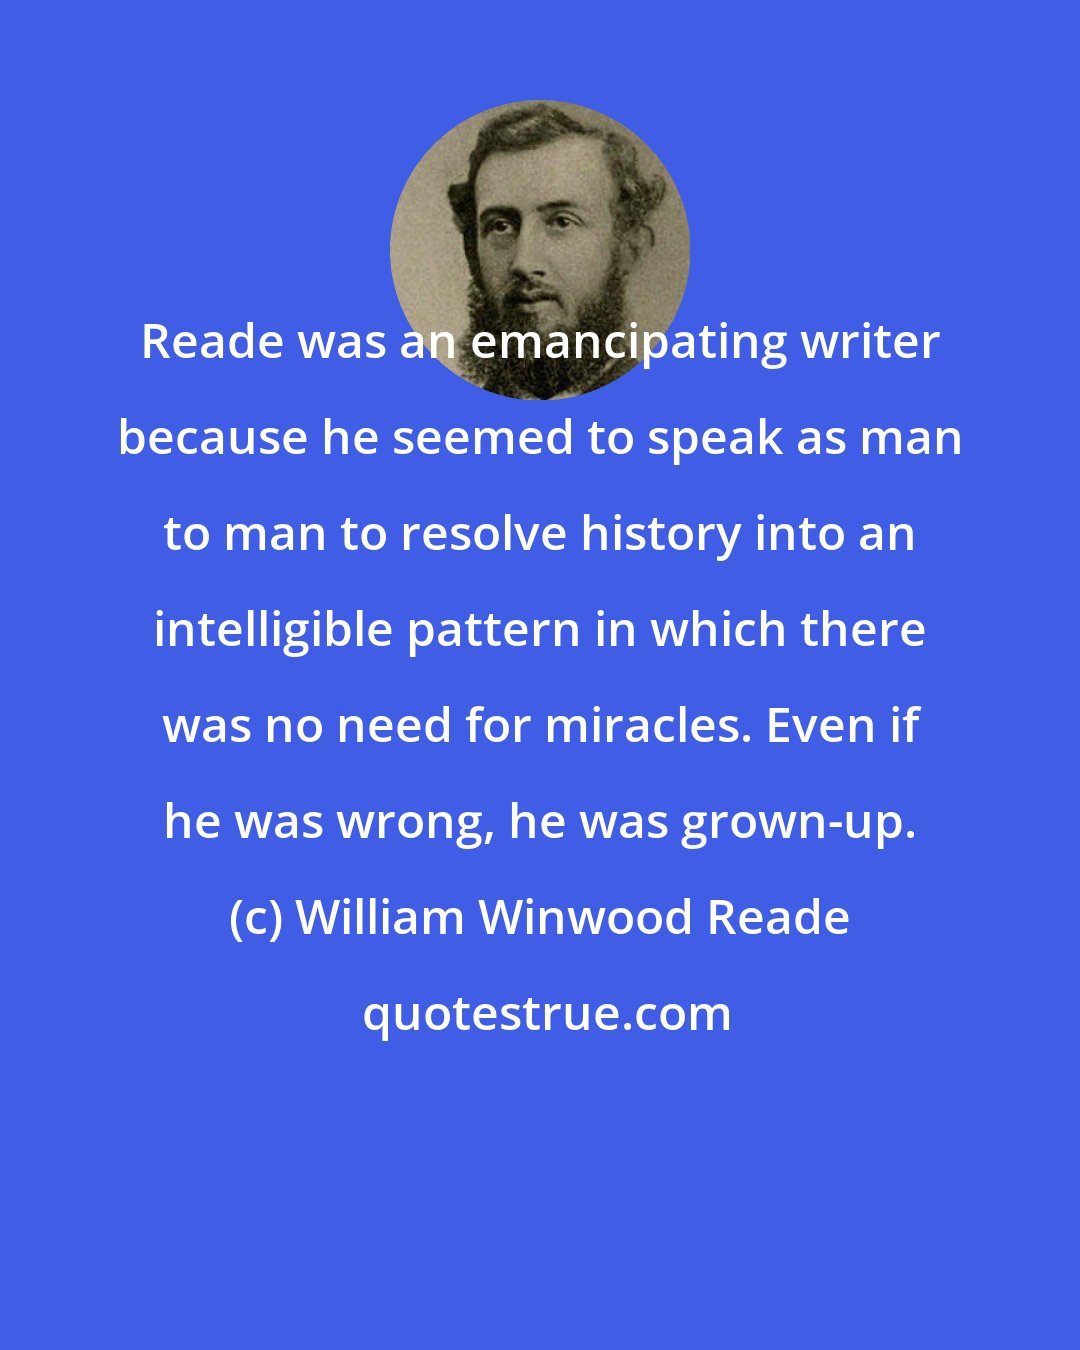 William Winwood Reade: Reade was an emancipating writer because he seemed to speak as man to man to resolve history into an intelligible pattern in which there was no need for miracles. Even if he was wrong, he was grown-up.